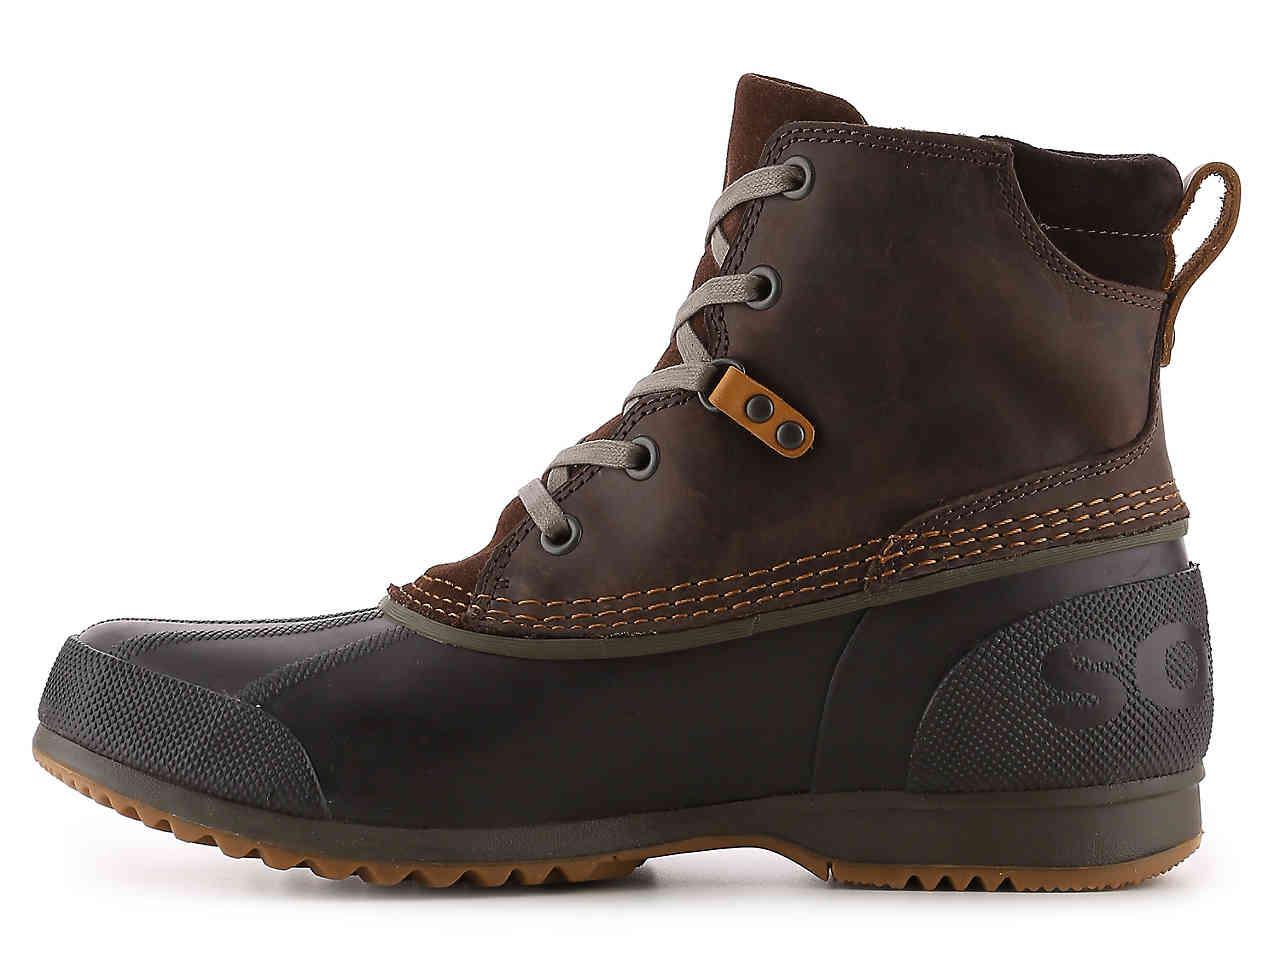 Sorel Leather Ankeny Duck Boot in Brown for Men - Lyst